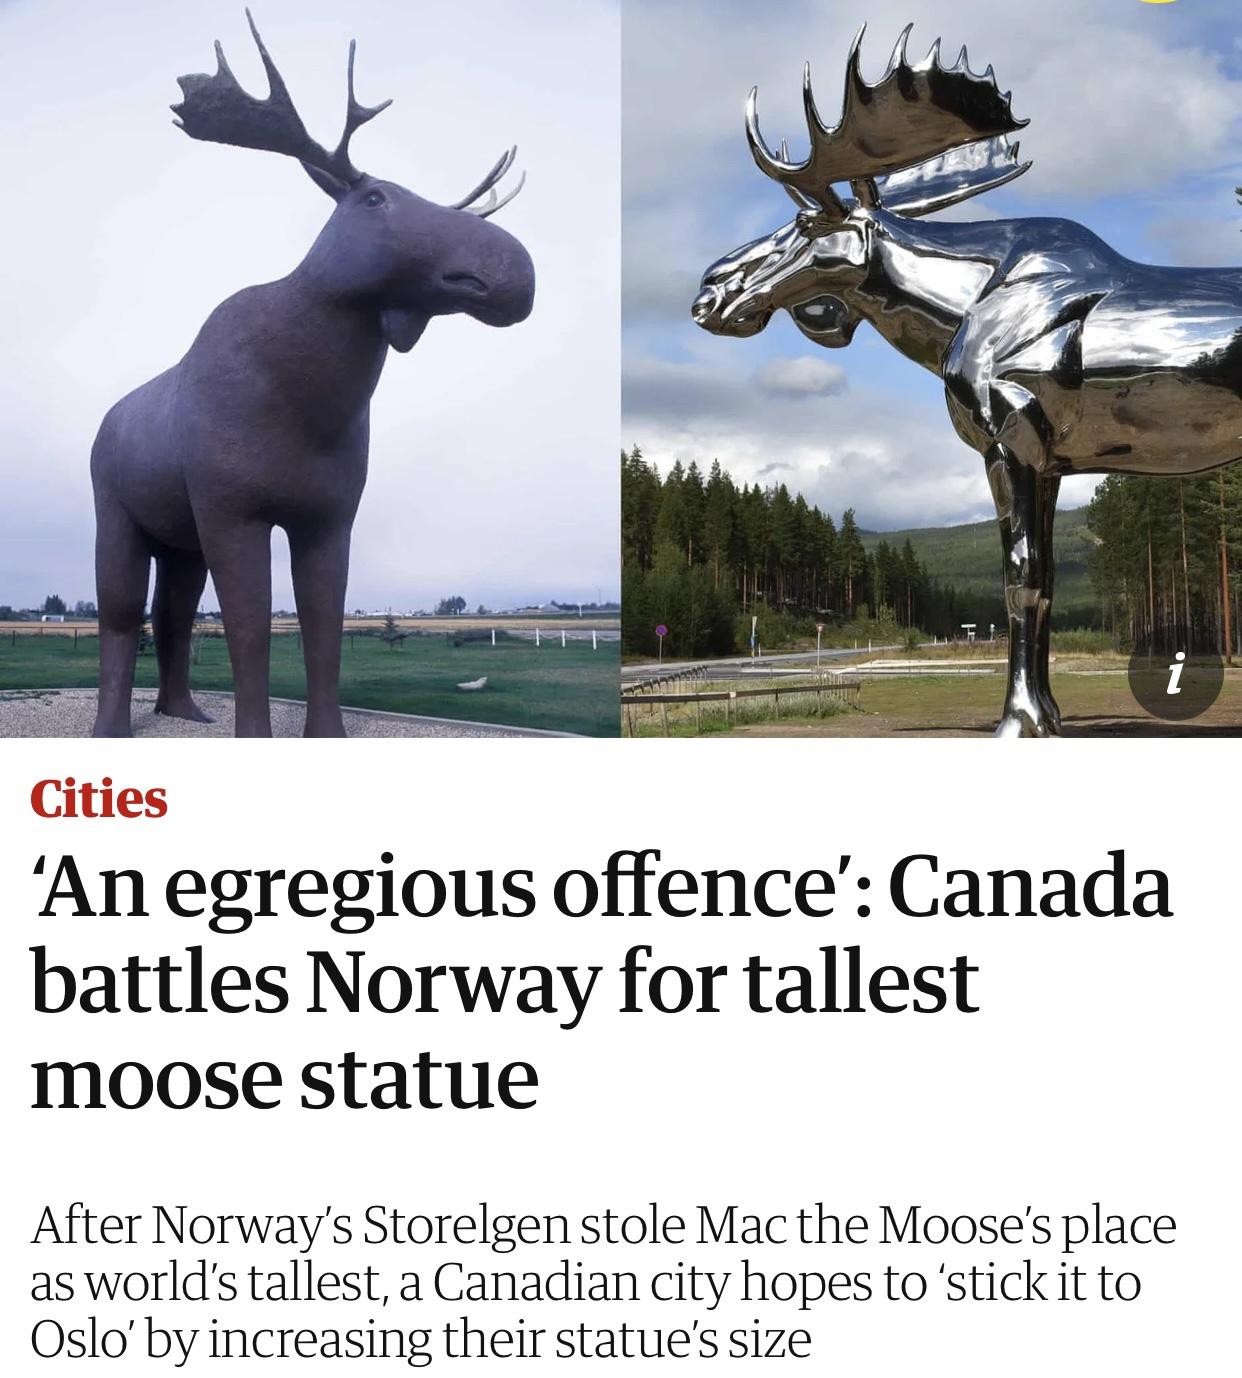 norwegian moose - i Cities An egregious offence' Canada battles Norway for tallest moose statue After Norway's Storelgen stole Mac the Moose's place as world's tallest, a Canadian city hopes to 'stick it to Oslo'by increasing their statue's size